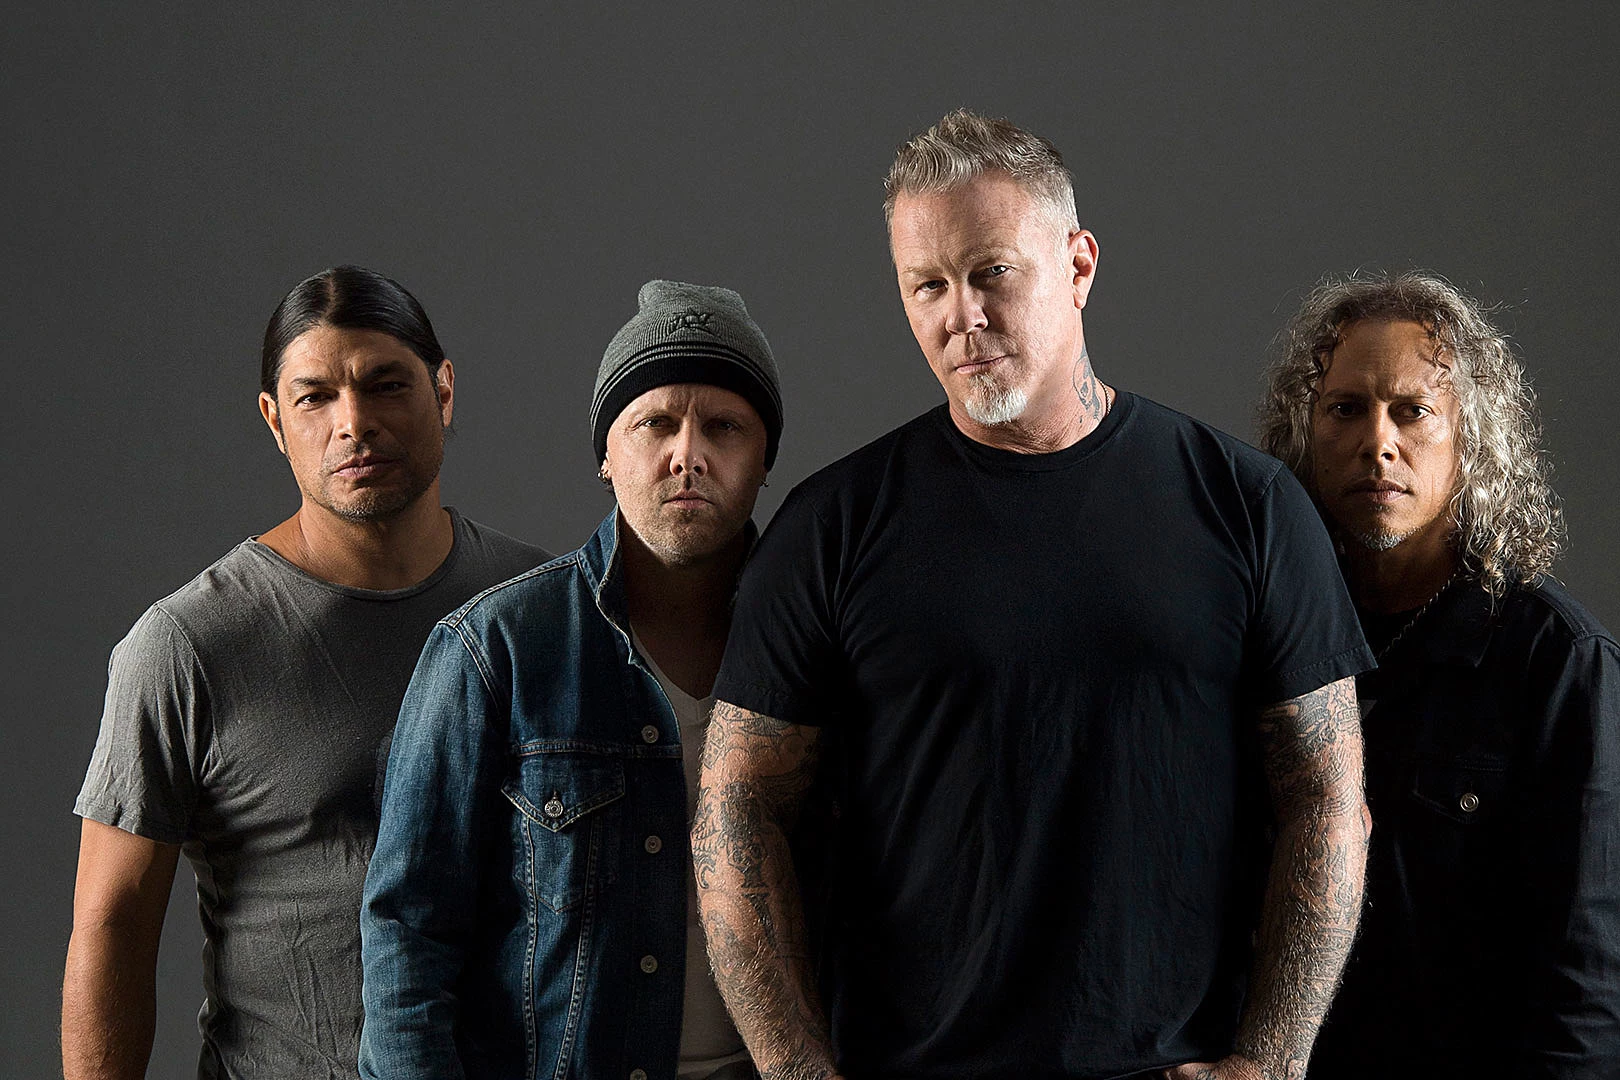 New Metallica Book 'The $24.95 Book' Is Coming Out This Summer